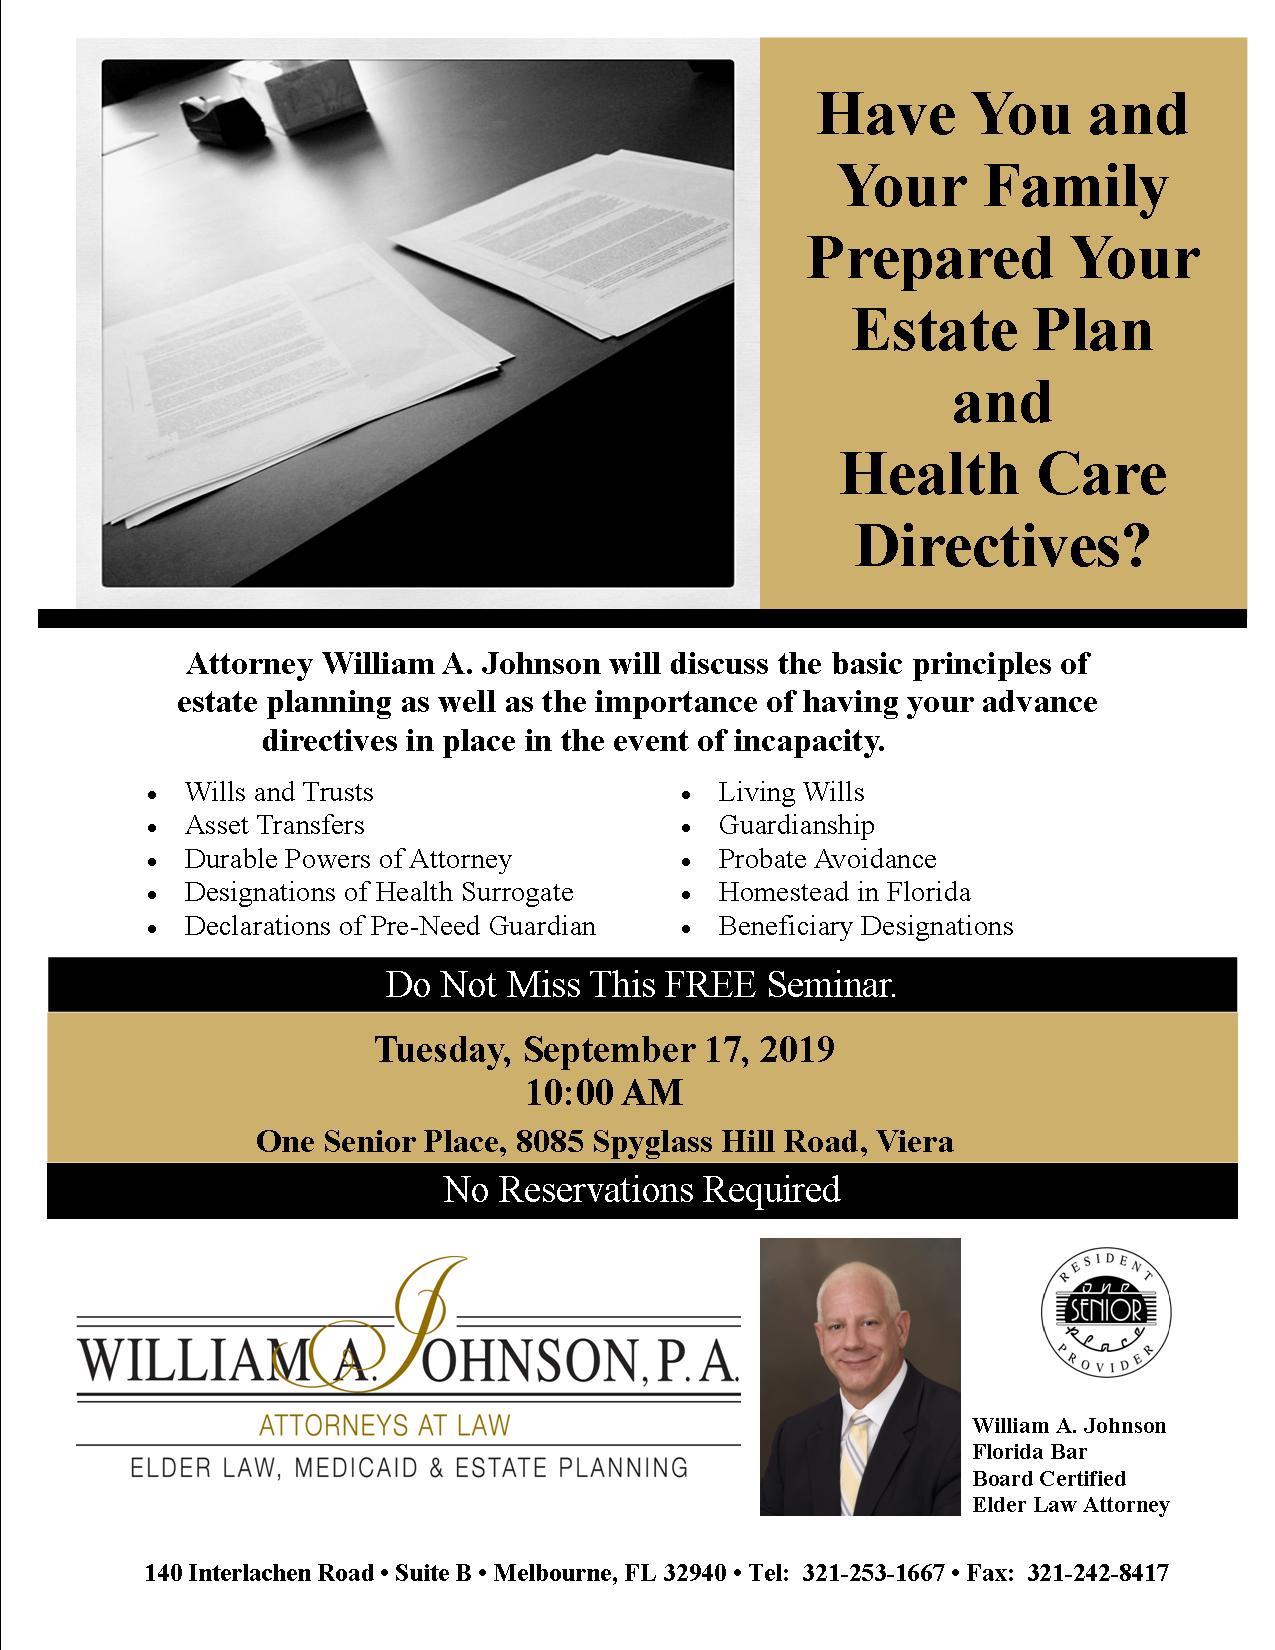 Have You and Your Family Prepared Your Estate Plan and  Health Care Directives? presented by William A. Johnson, P.A.